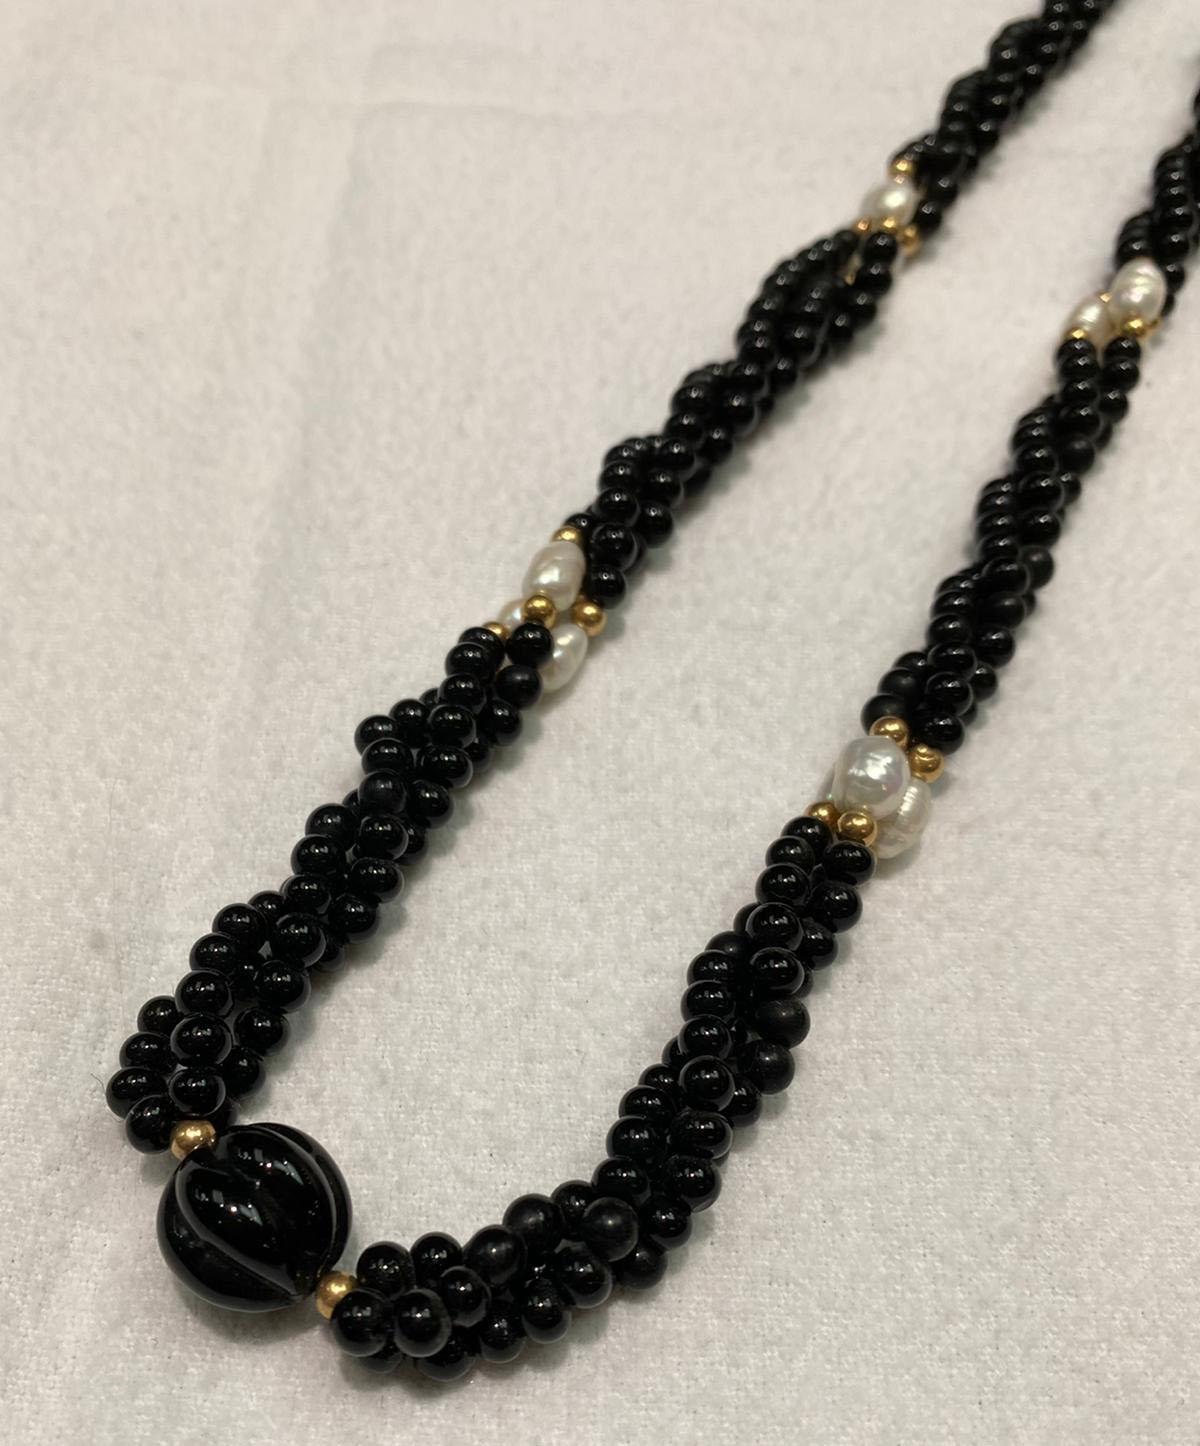 Women's 3 Strands of Onyx Pearls with 8pcs of Freshwater Pearls and Onyx Centerpiece For Sale